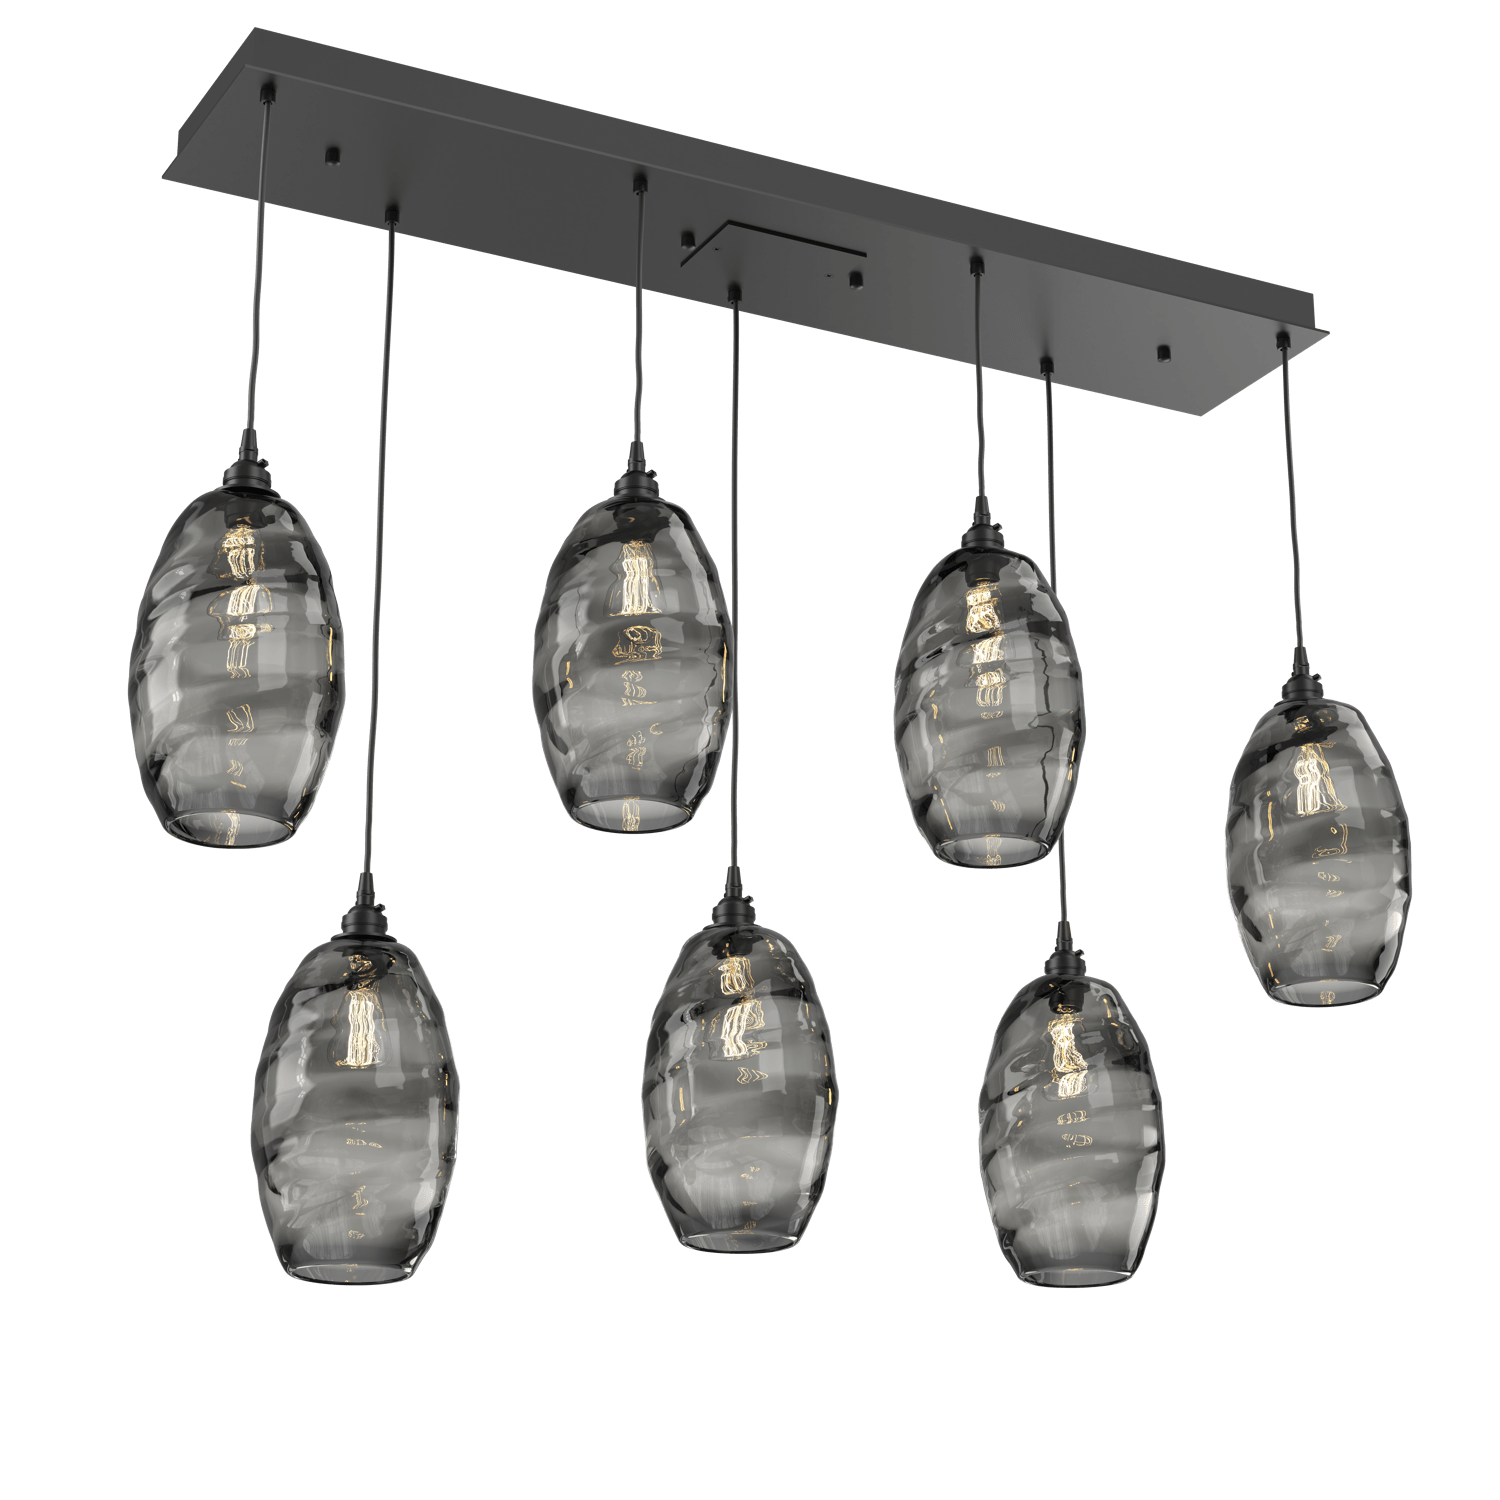 PLB0035-07-MB-OS-Hammerton-Studio-Optic-Blown-Glass-Elisse-7-light-linear-pendant-chandelier-with-matte-black-finish-and-optic-smoke-blown-glass-shades-and-incandescent-lamping